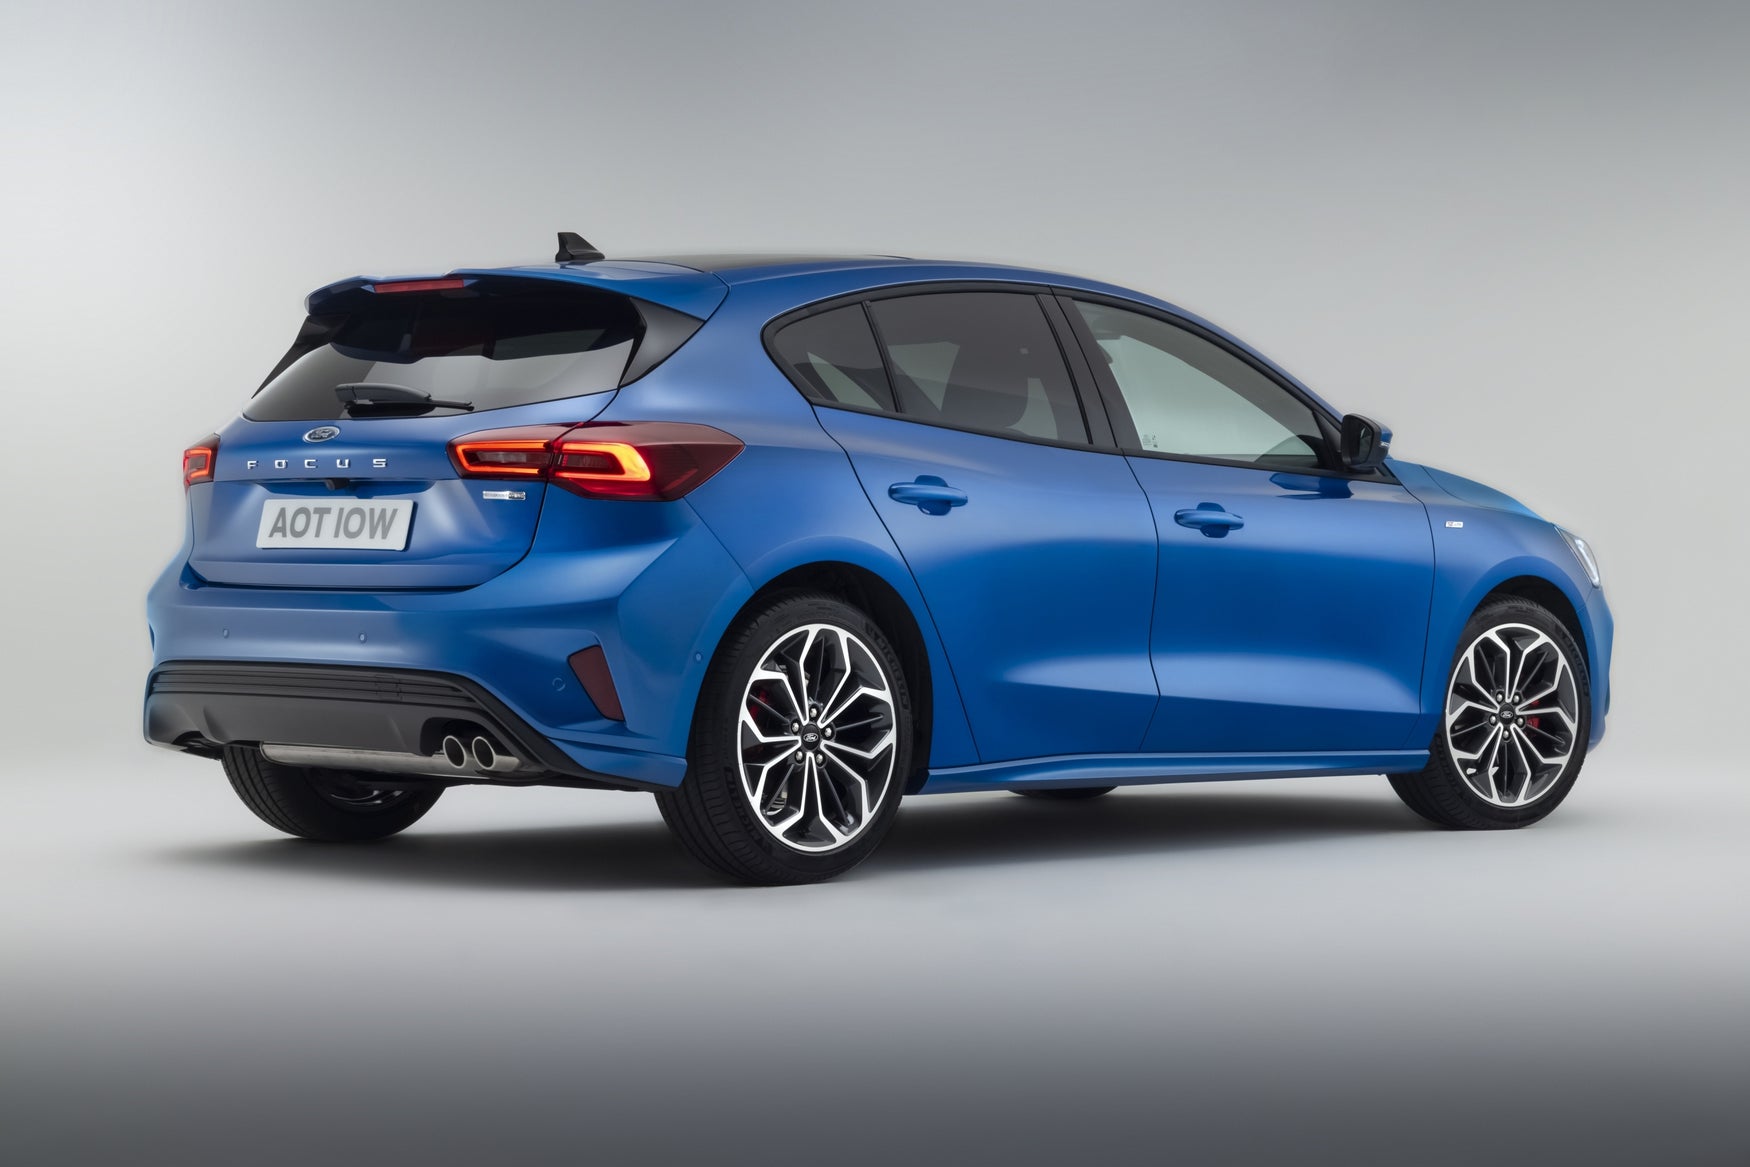 New 2022 Ford Focus rear